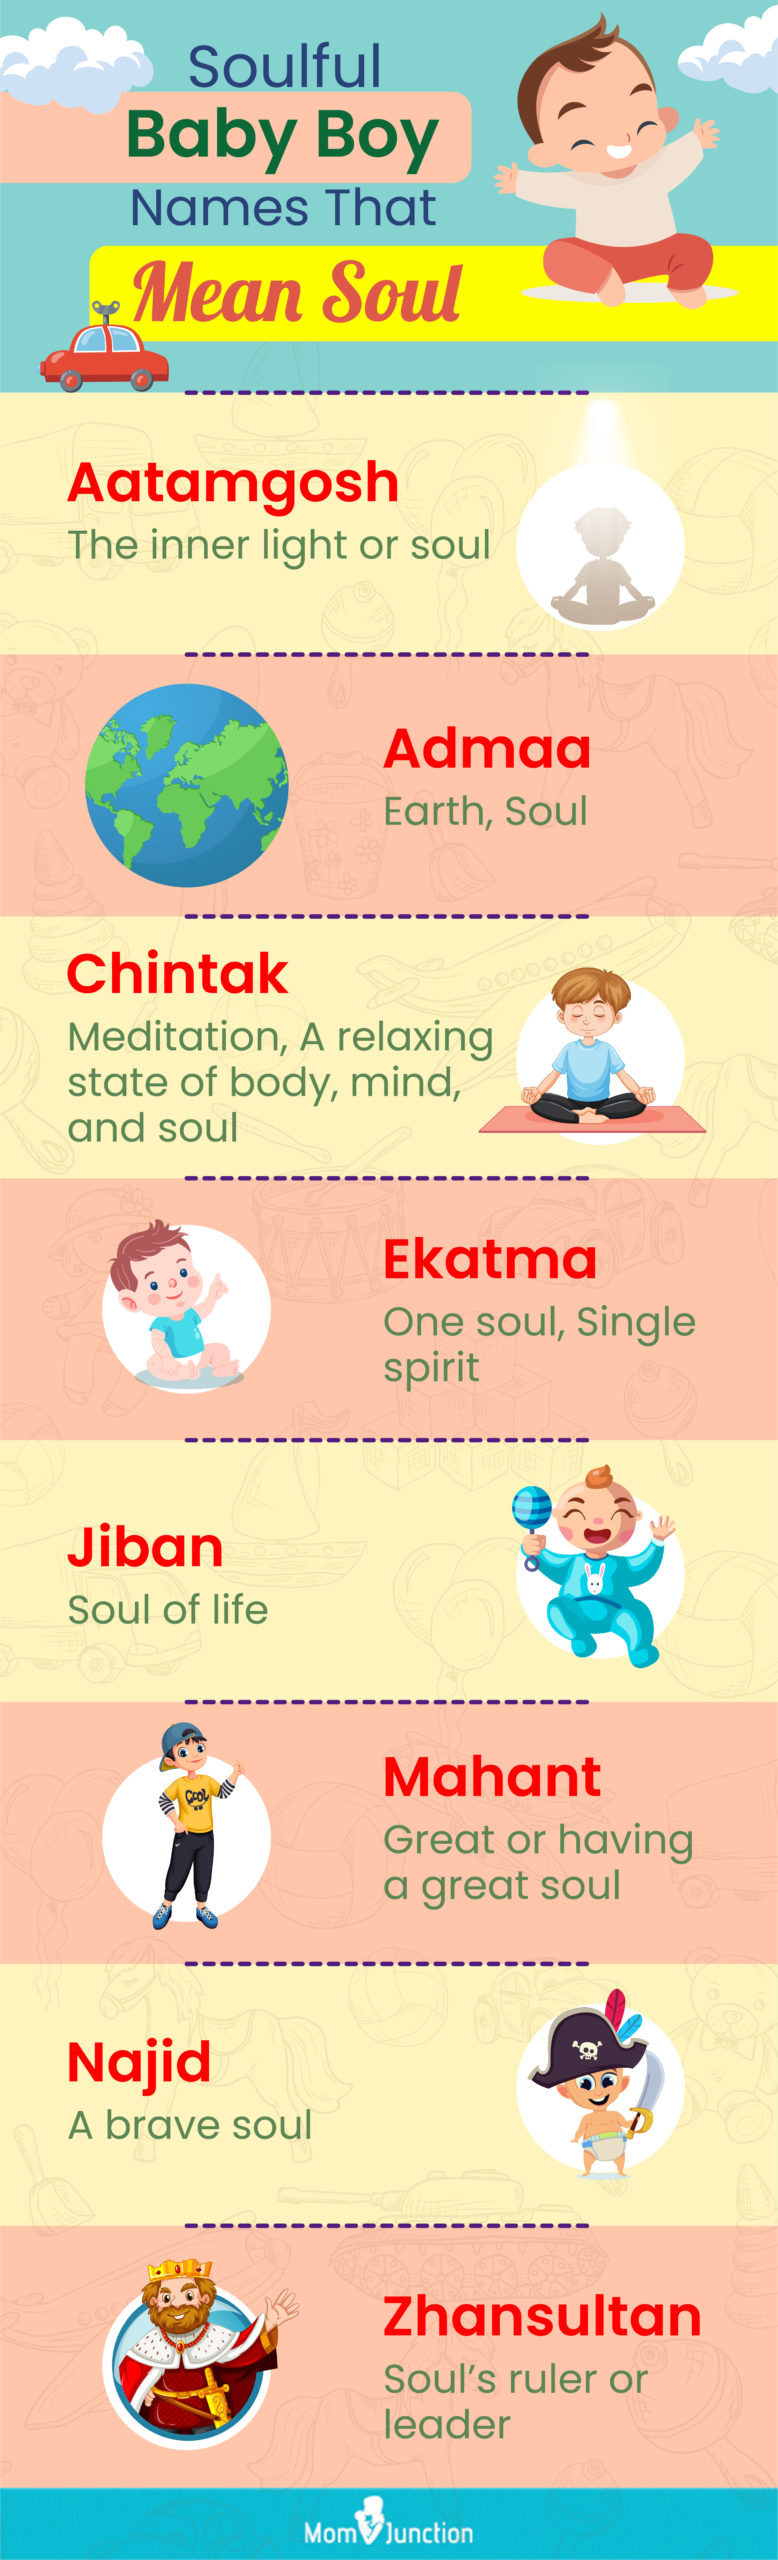 soulful baby boy names that mean soul (infographic)